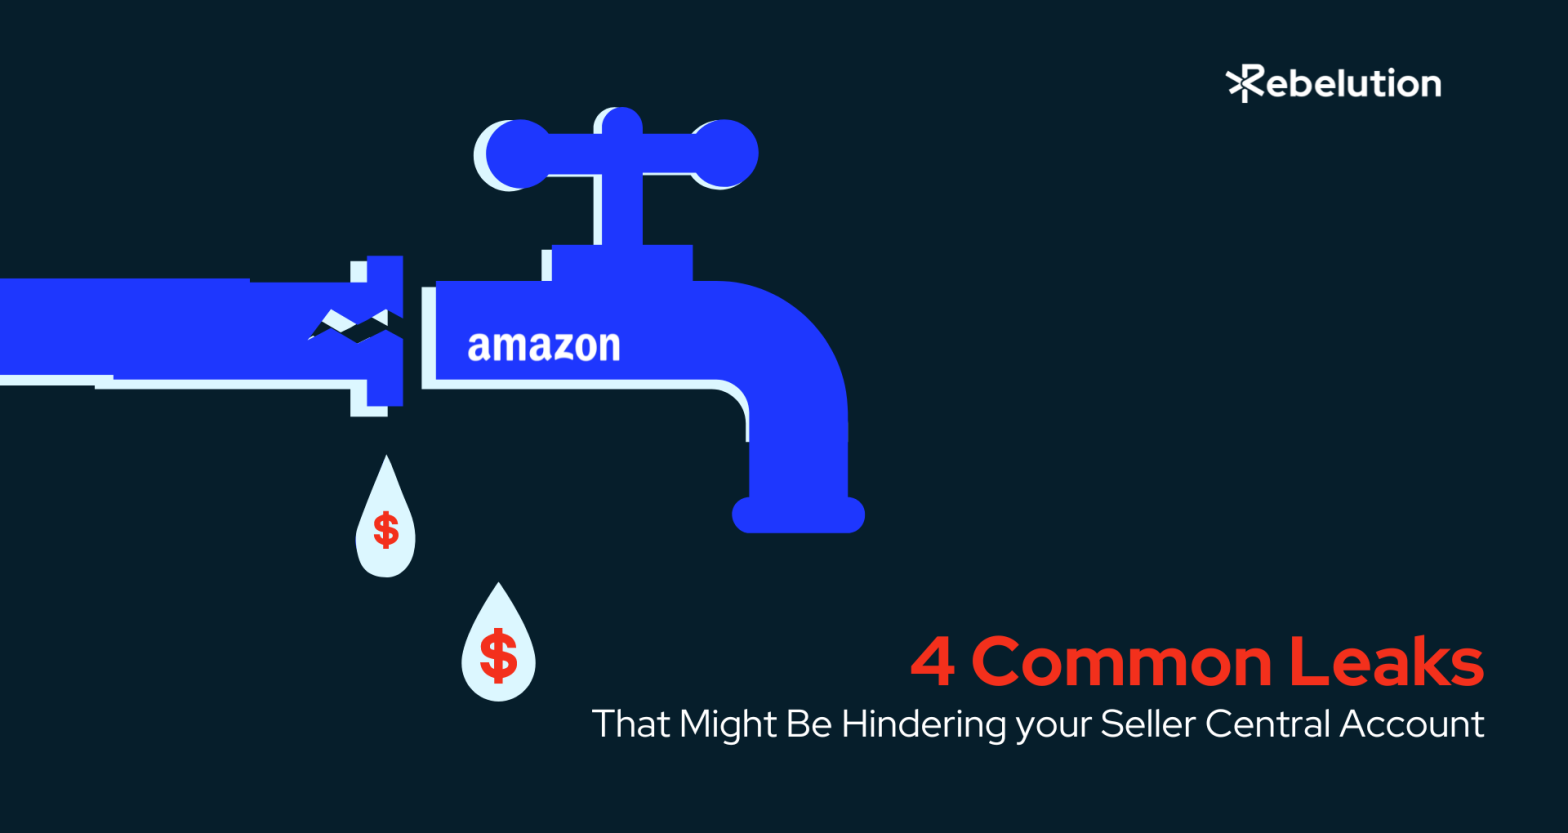 4 Common Leaks That Might Be Hindering your Seller Central Account